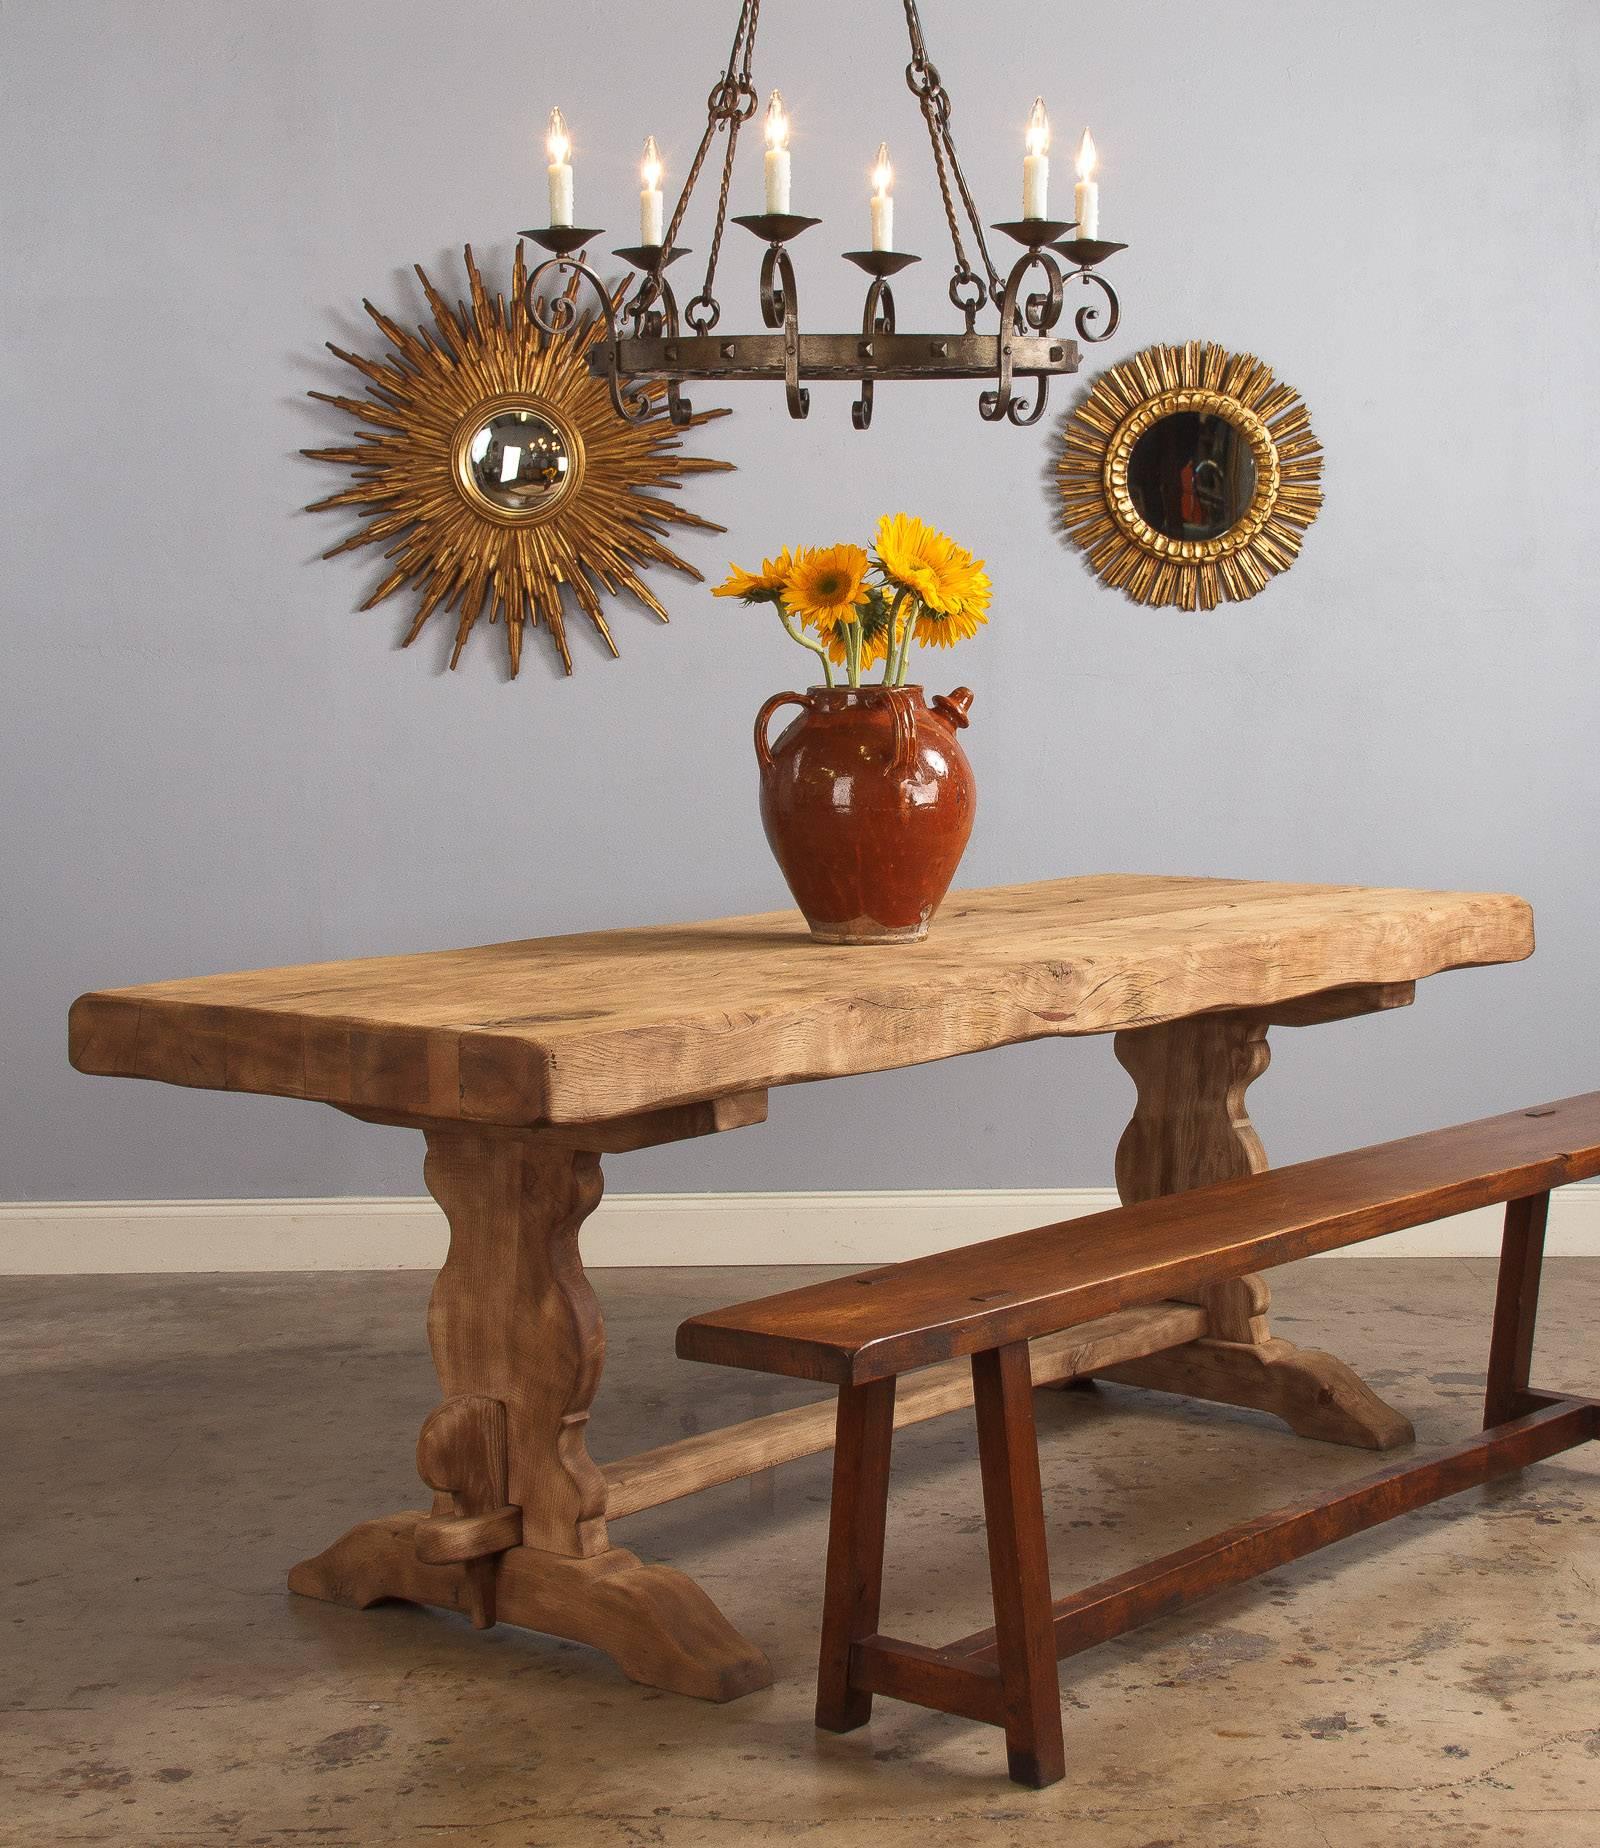 A washed oak French trestle table from the Beaujolais region with a splendid 3.75